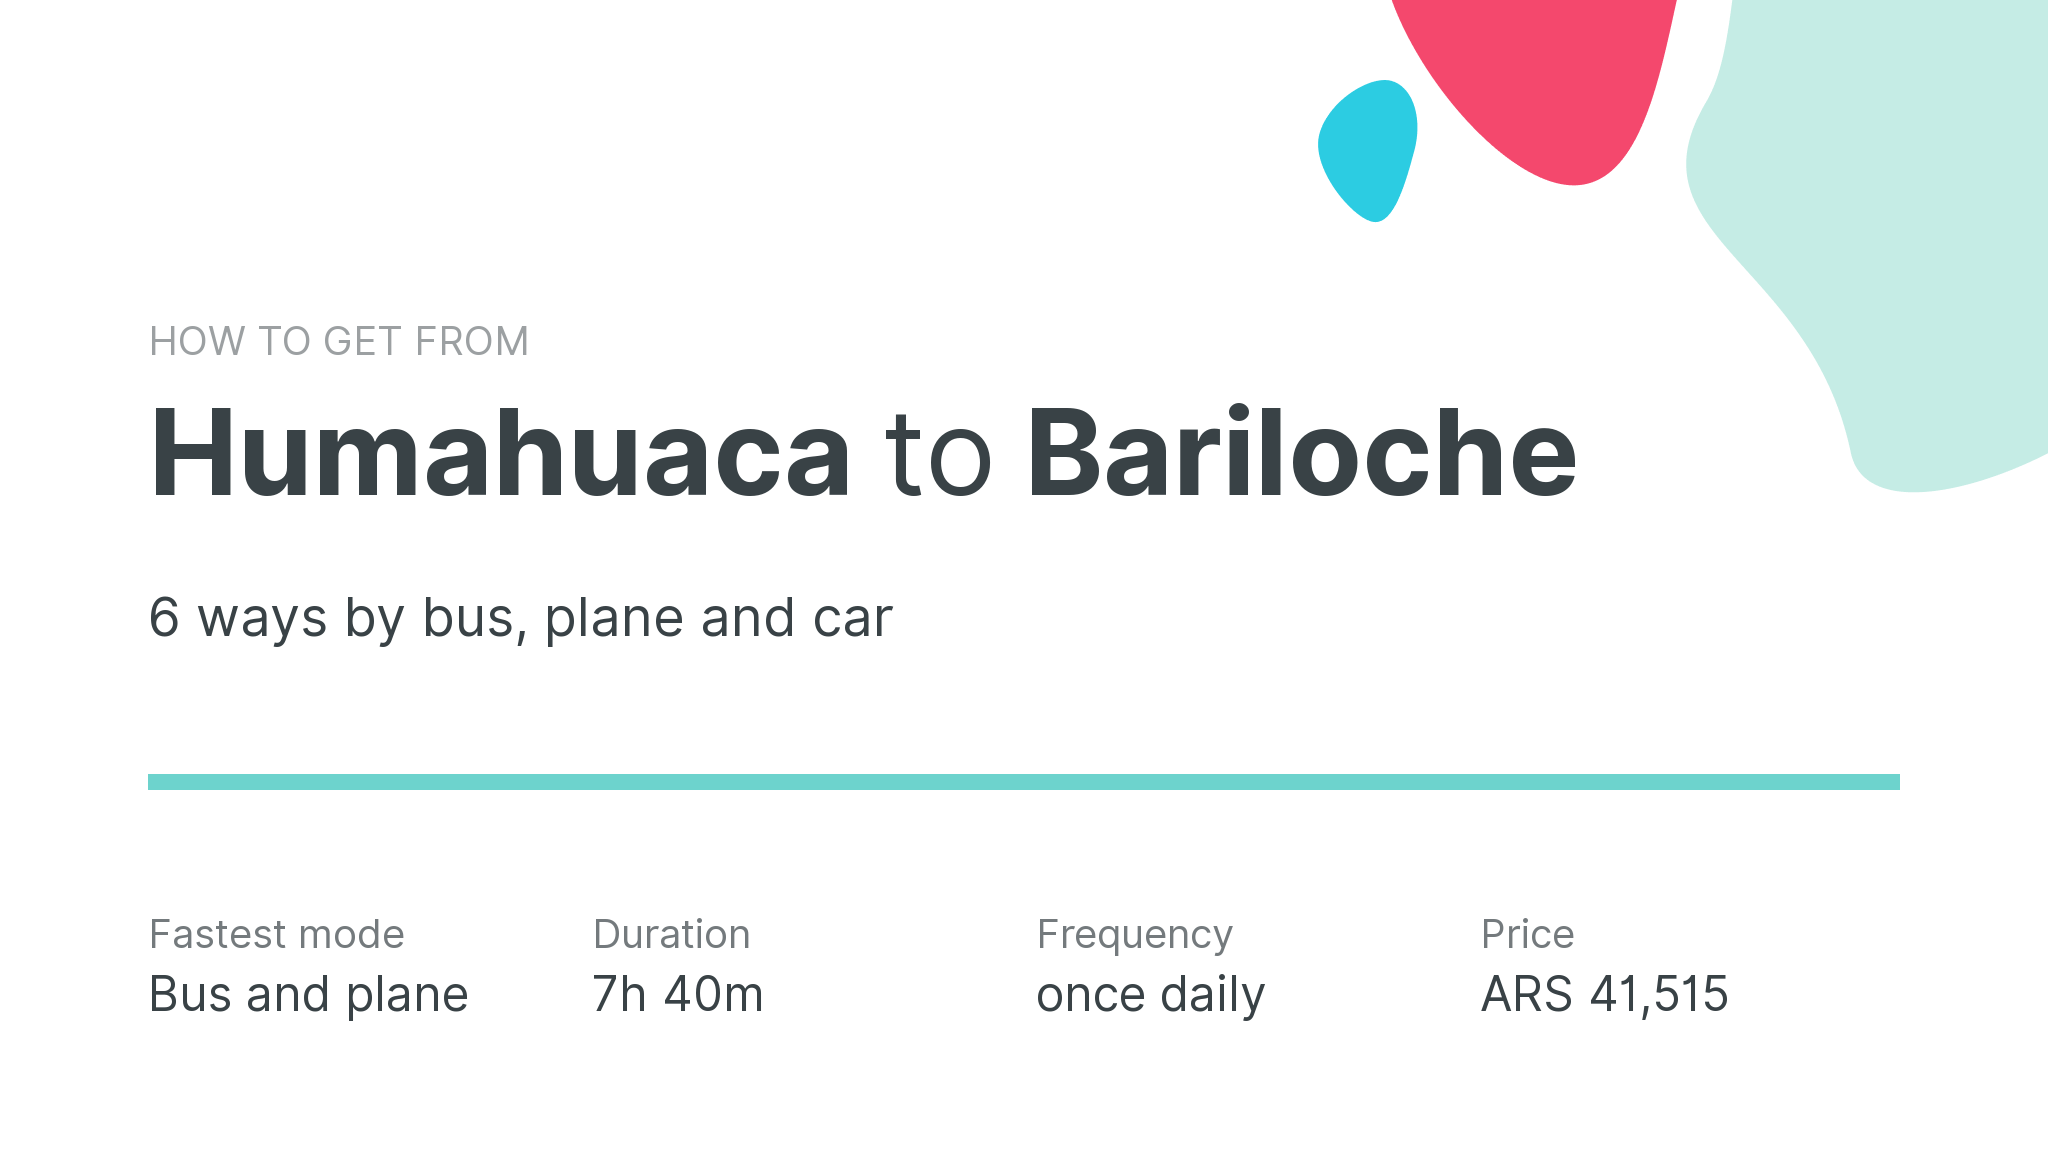 How do I get from Humahuaca to Bariloche